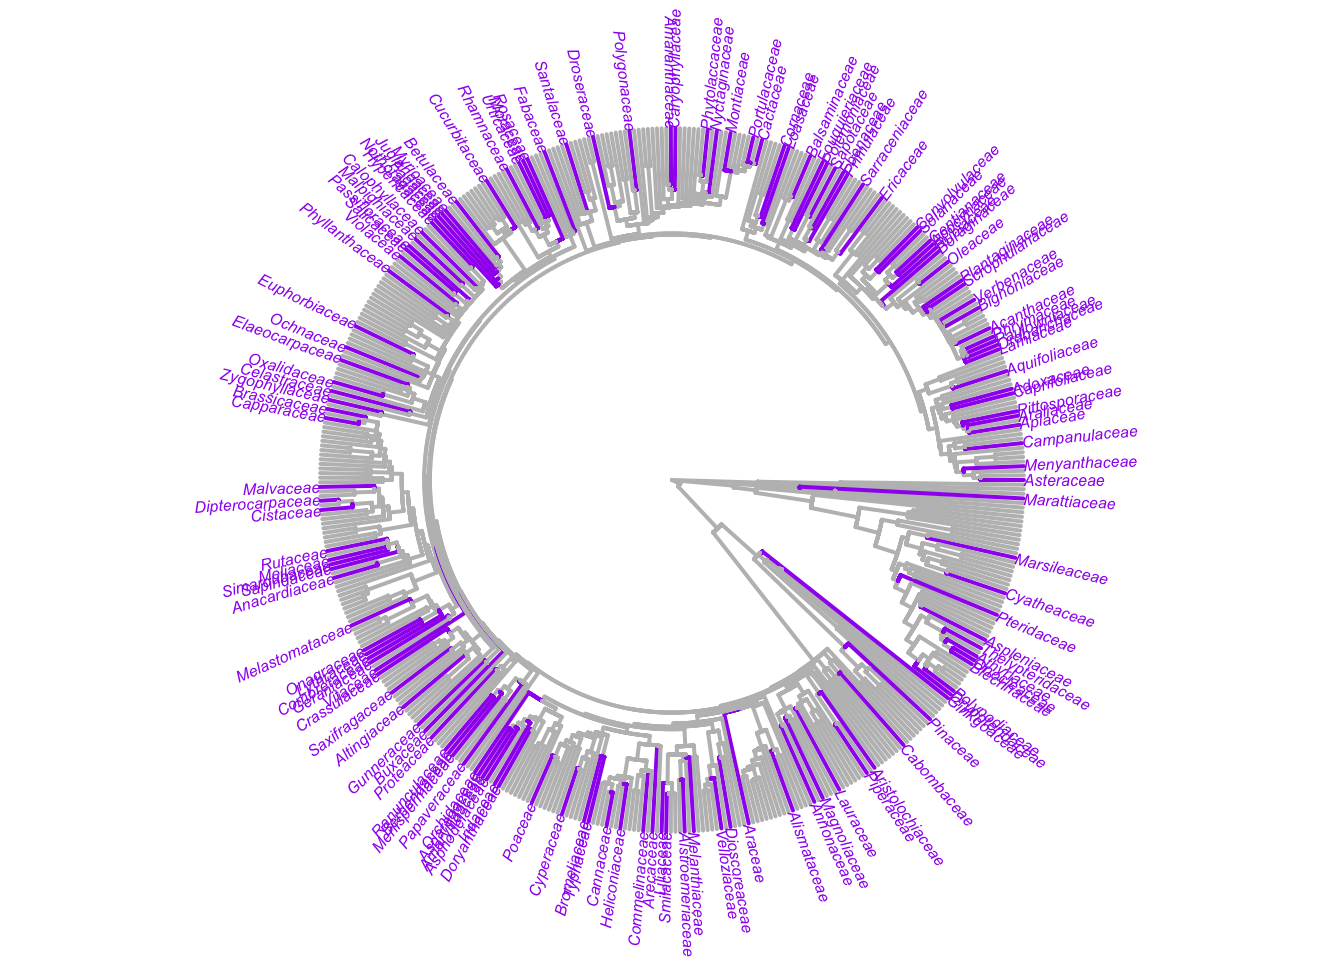 The distribution of currently sampled plant families (purple) across the phylogeny of all extant vascular plant families. Tree made by HerbVar collaborator [Marjorie Weber](http://www.theweberlab.com) with mega-tree from Jin et al. 2019.